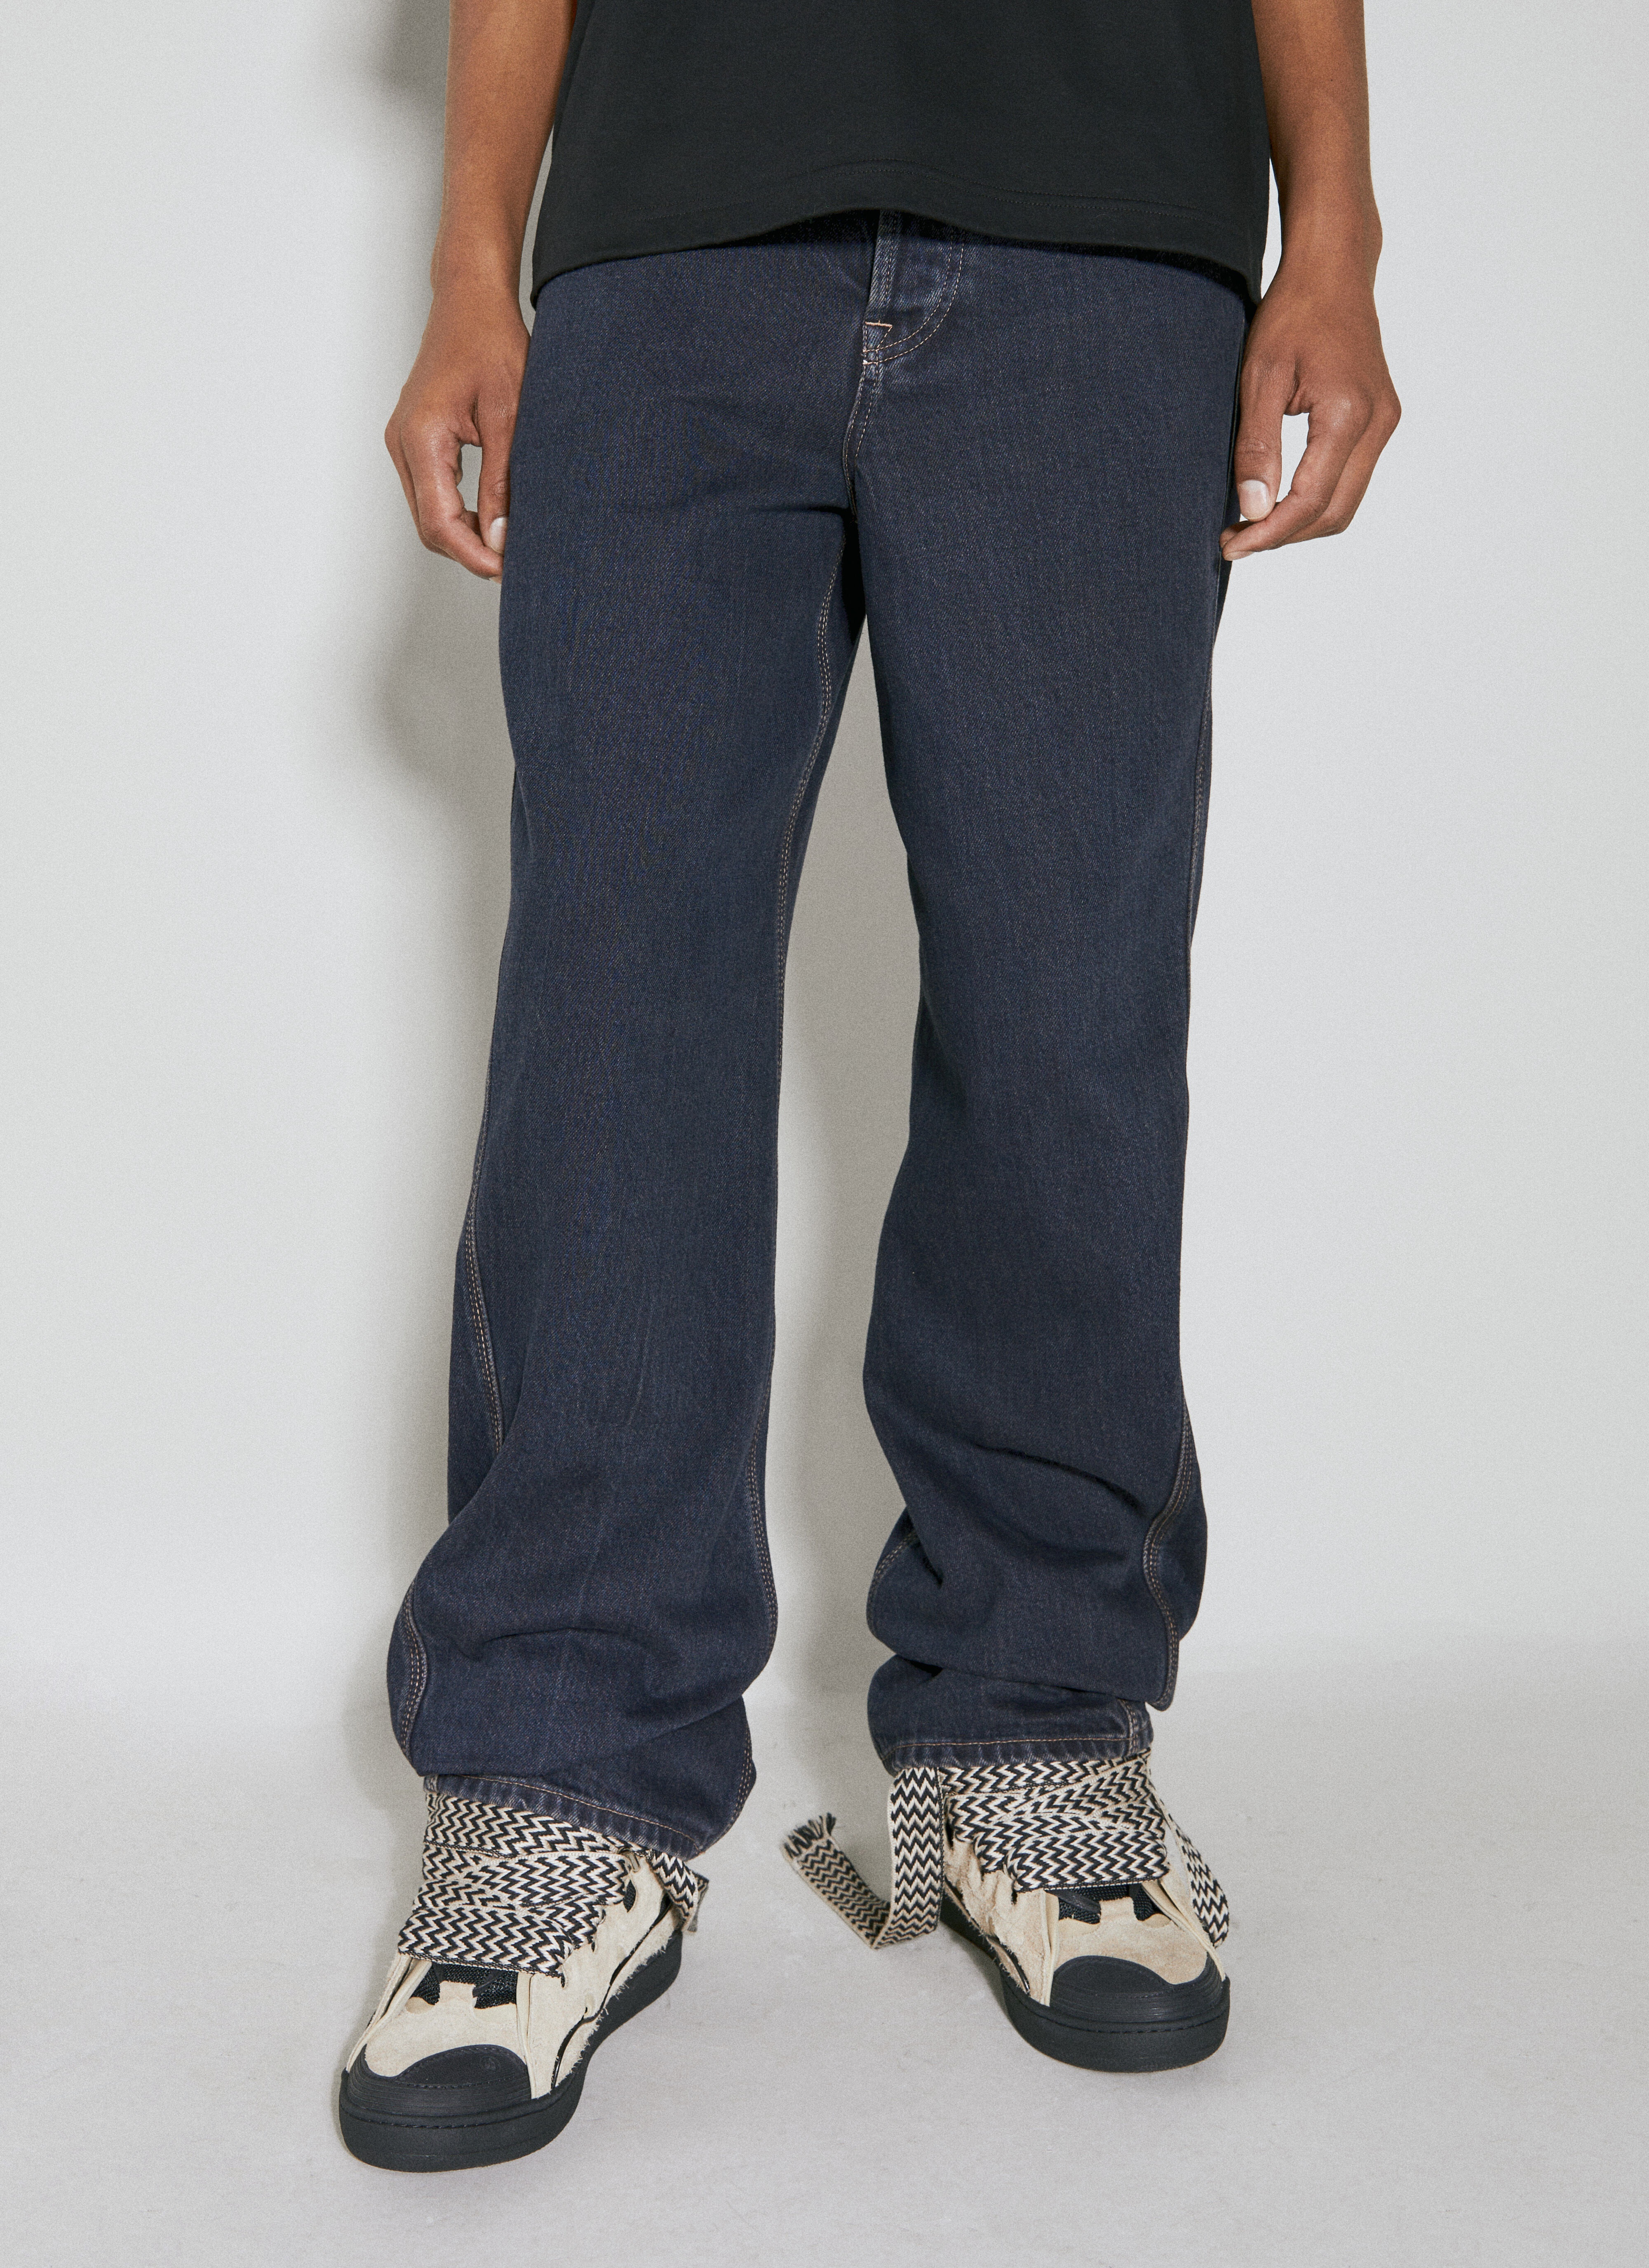 Baggy Twisted Leg Jeans - 1